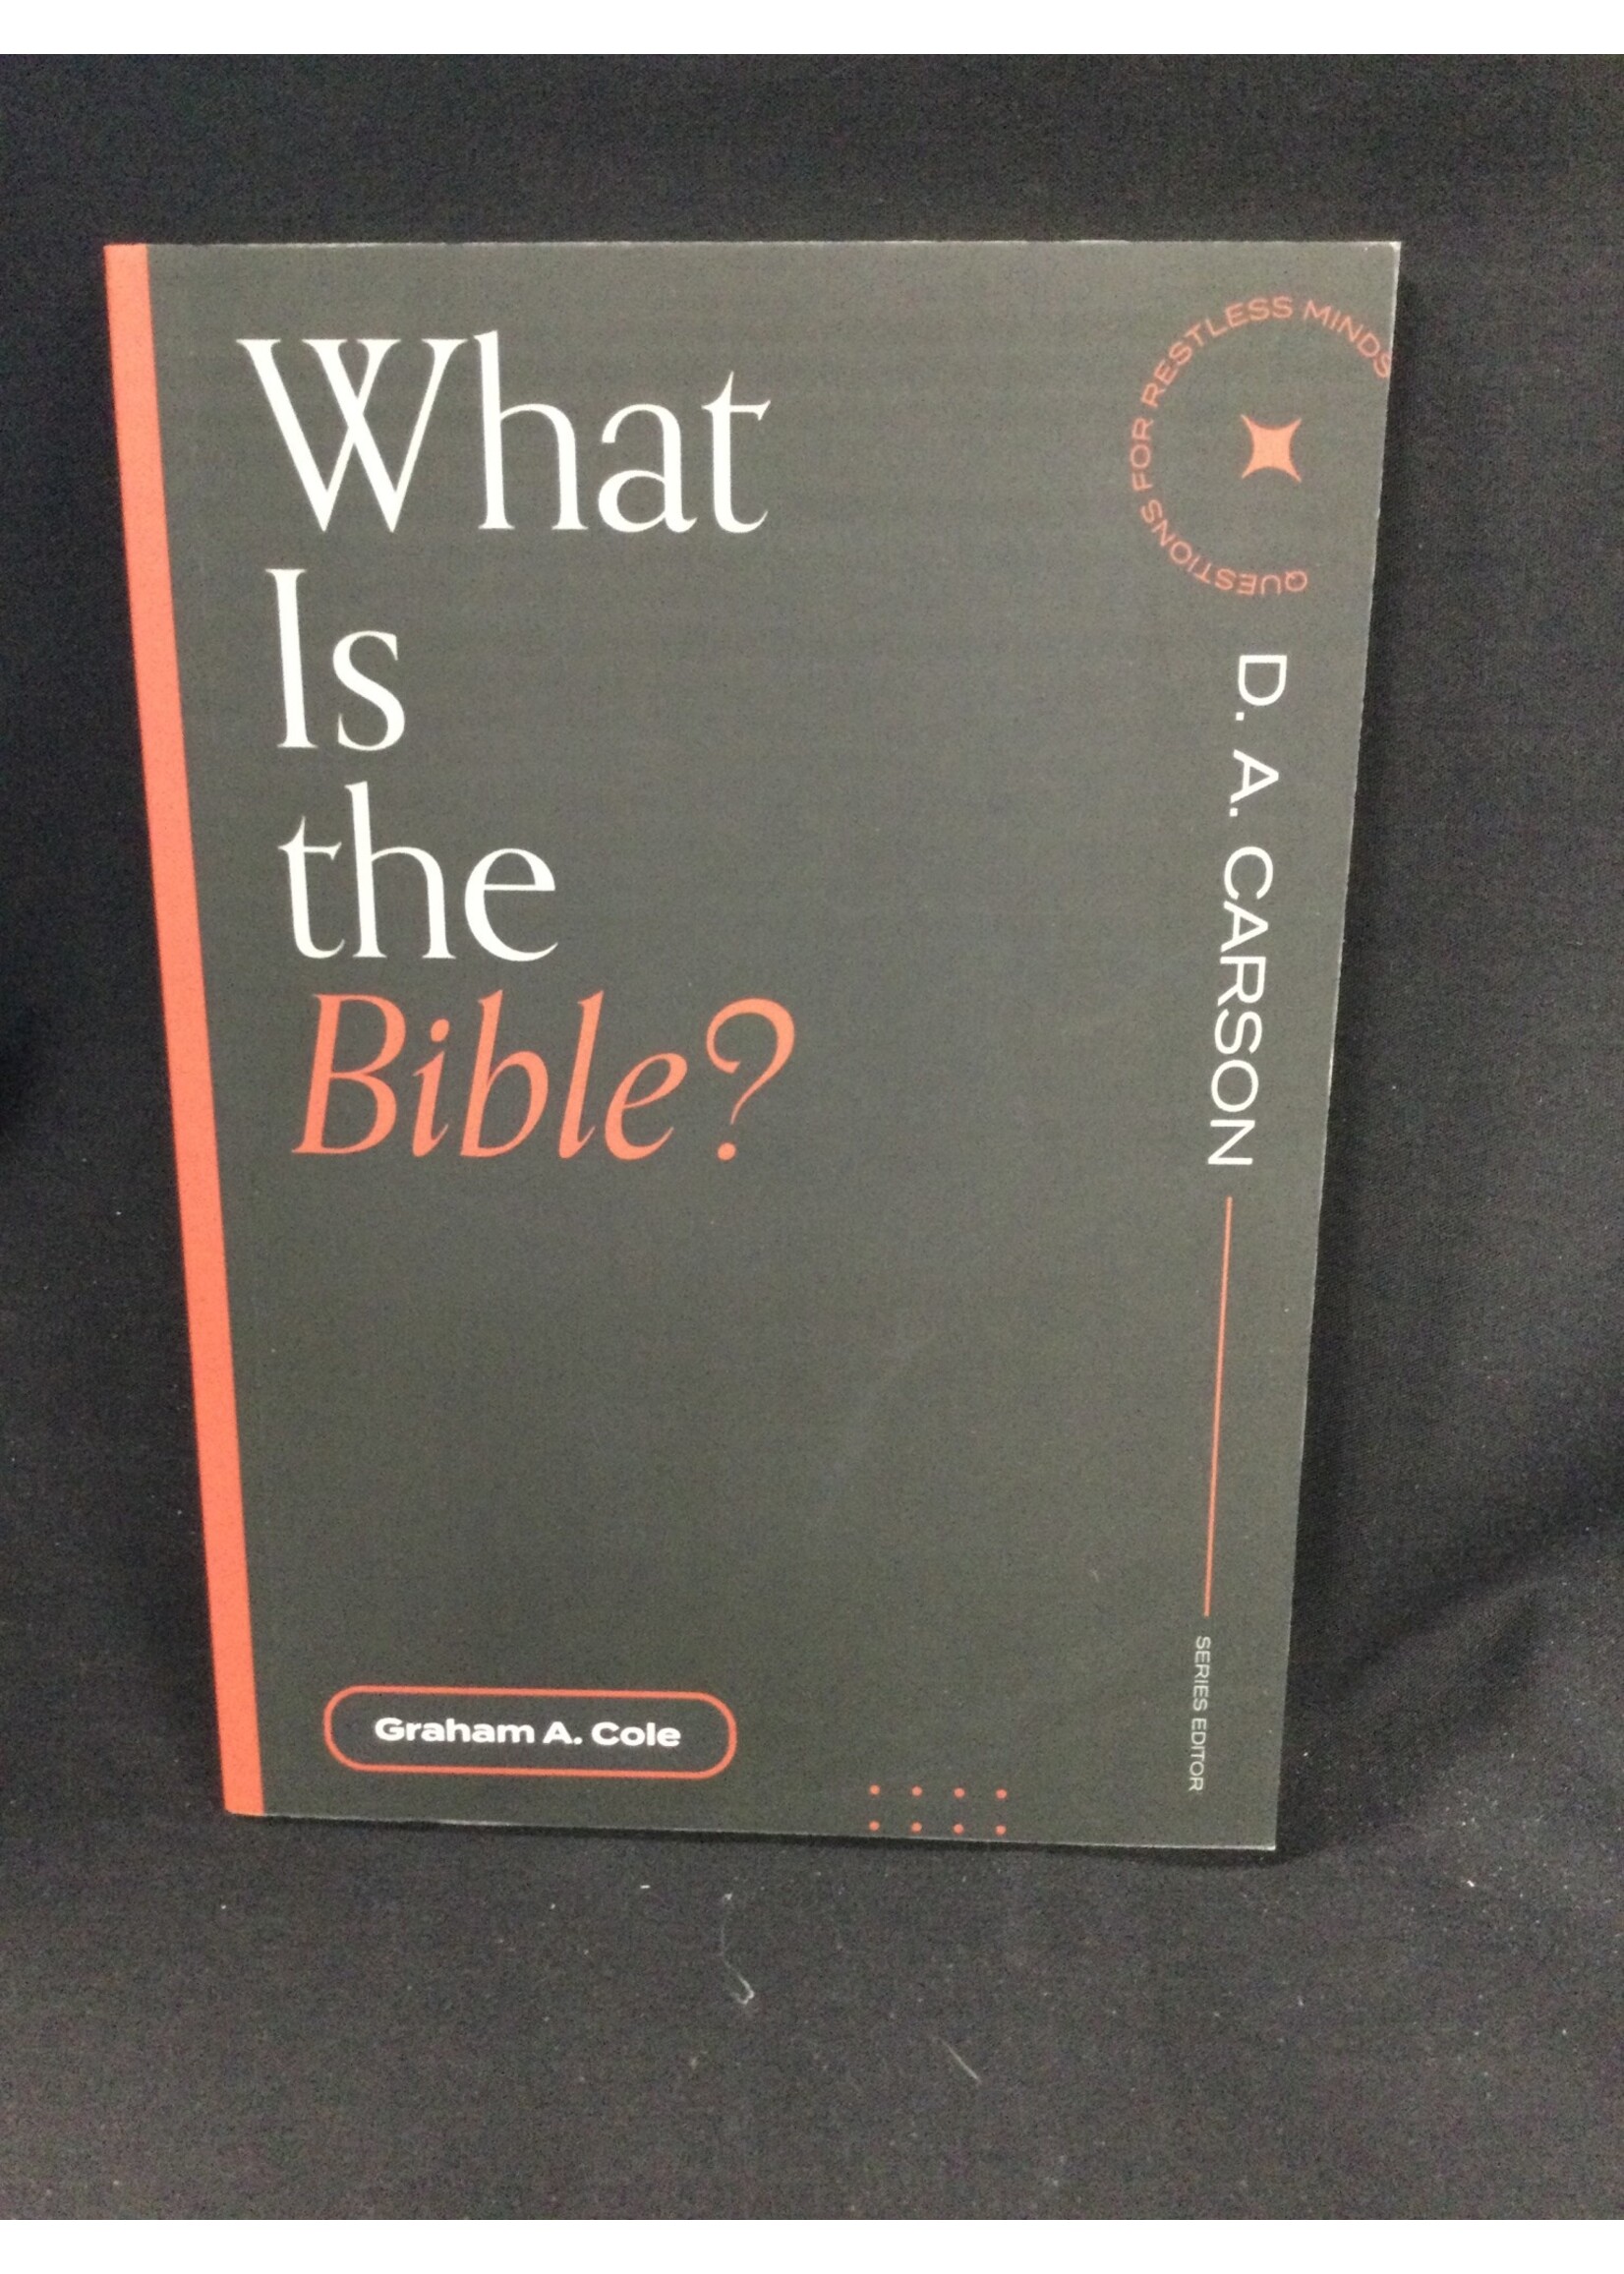 WHAT IS THE BIBLE